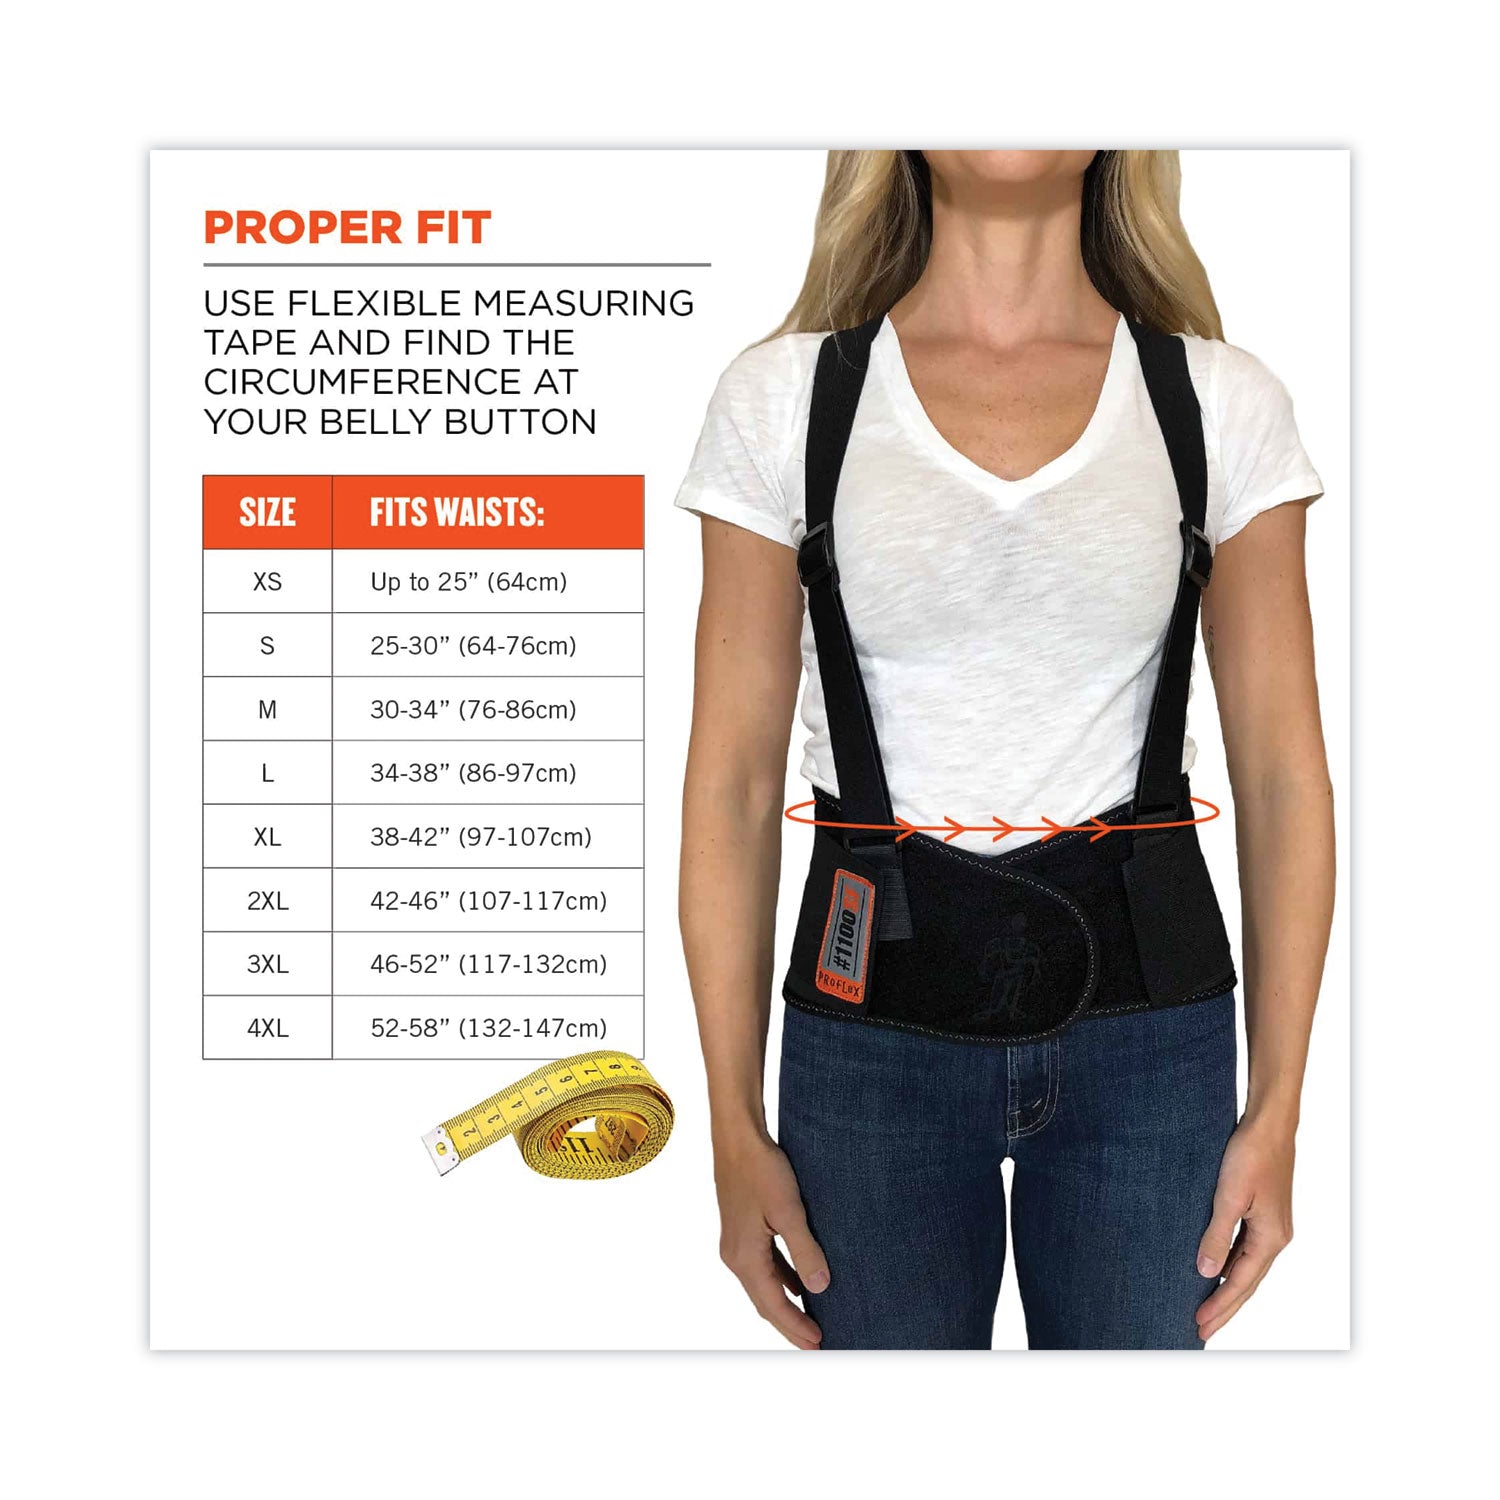 proflex-1100sf-standard-spandex-back-support-brace-small-25-to-30-waist-black-ships-in-1-3-business-days_ego11602 - 3